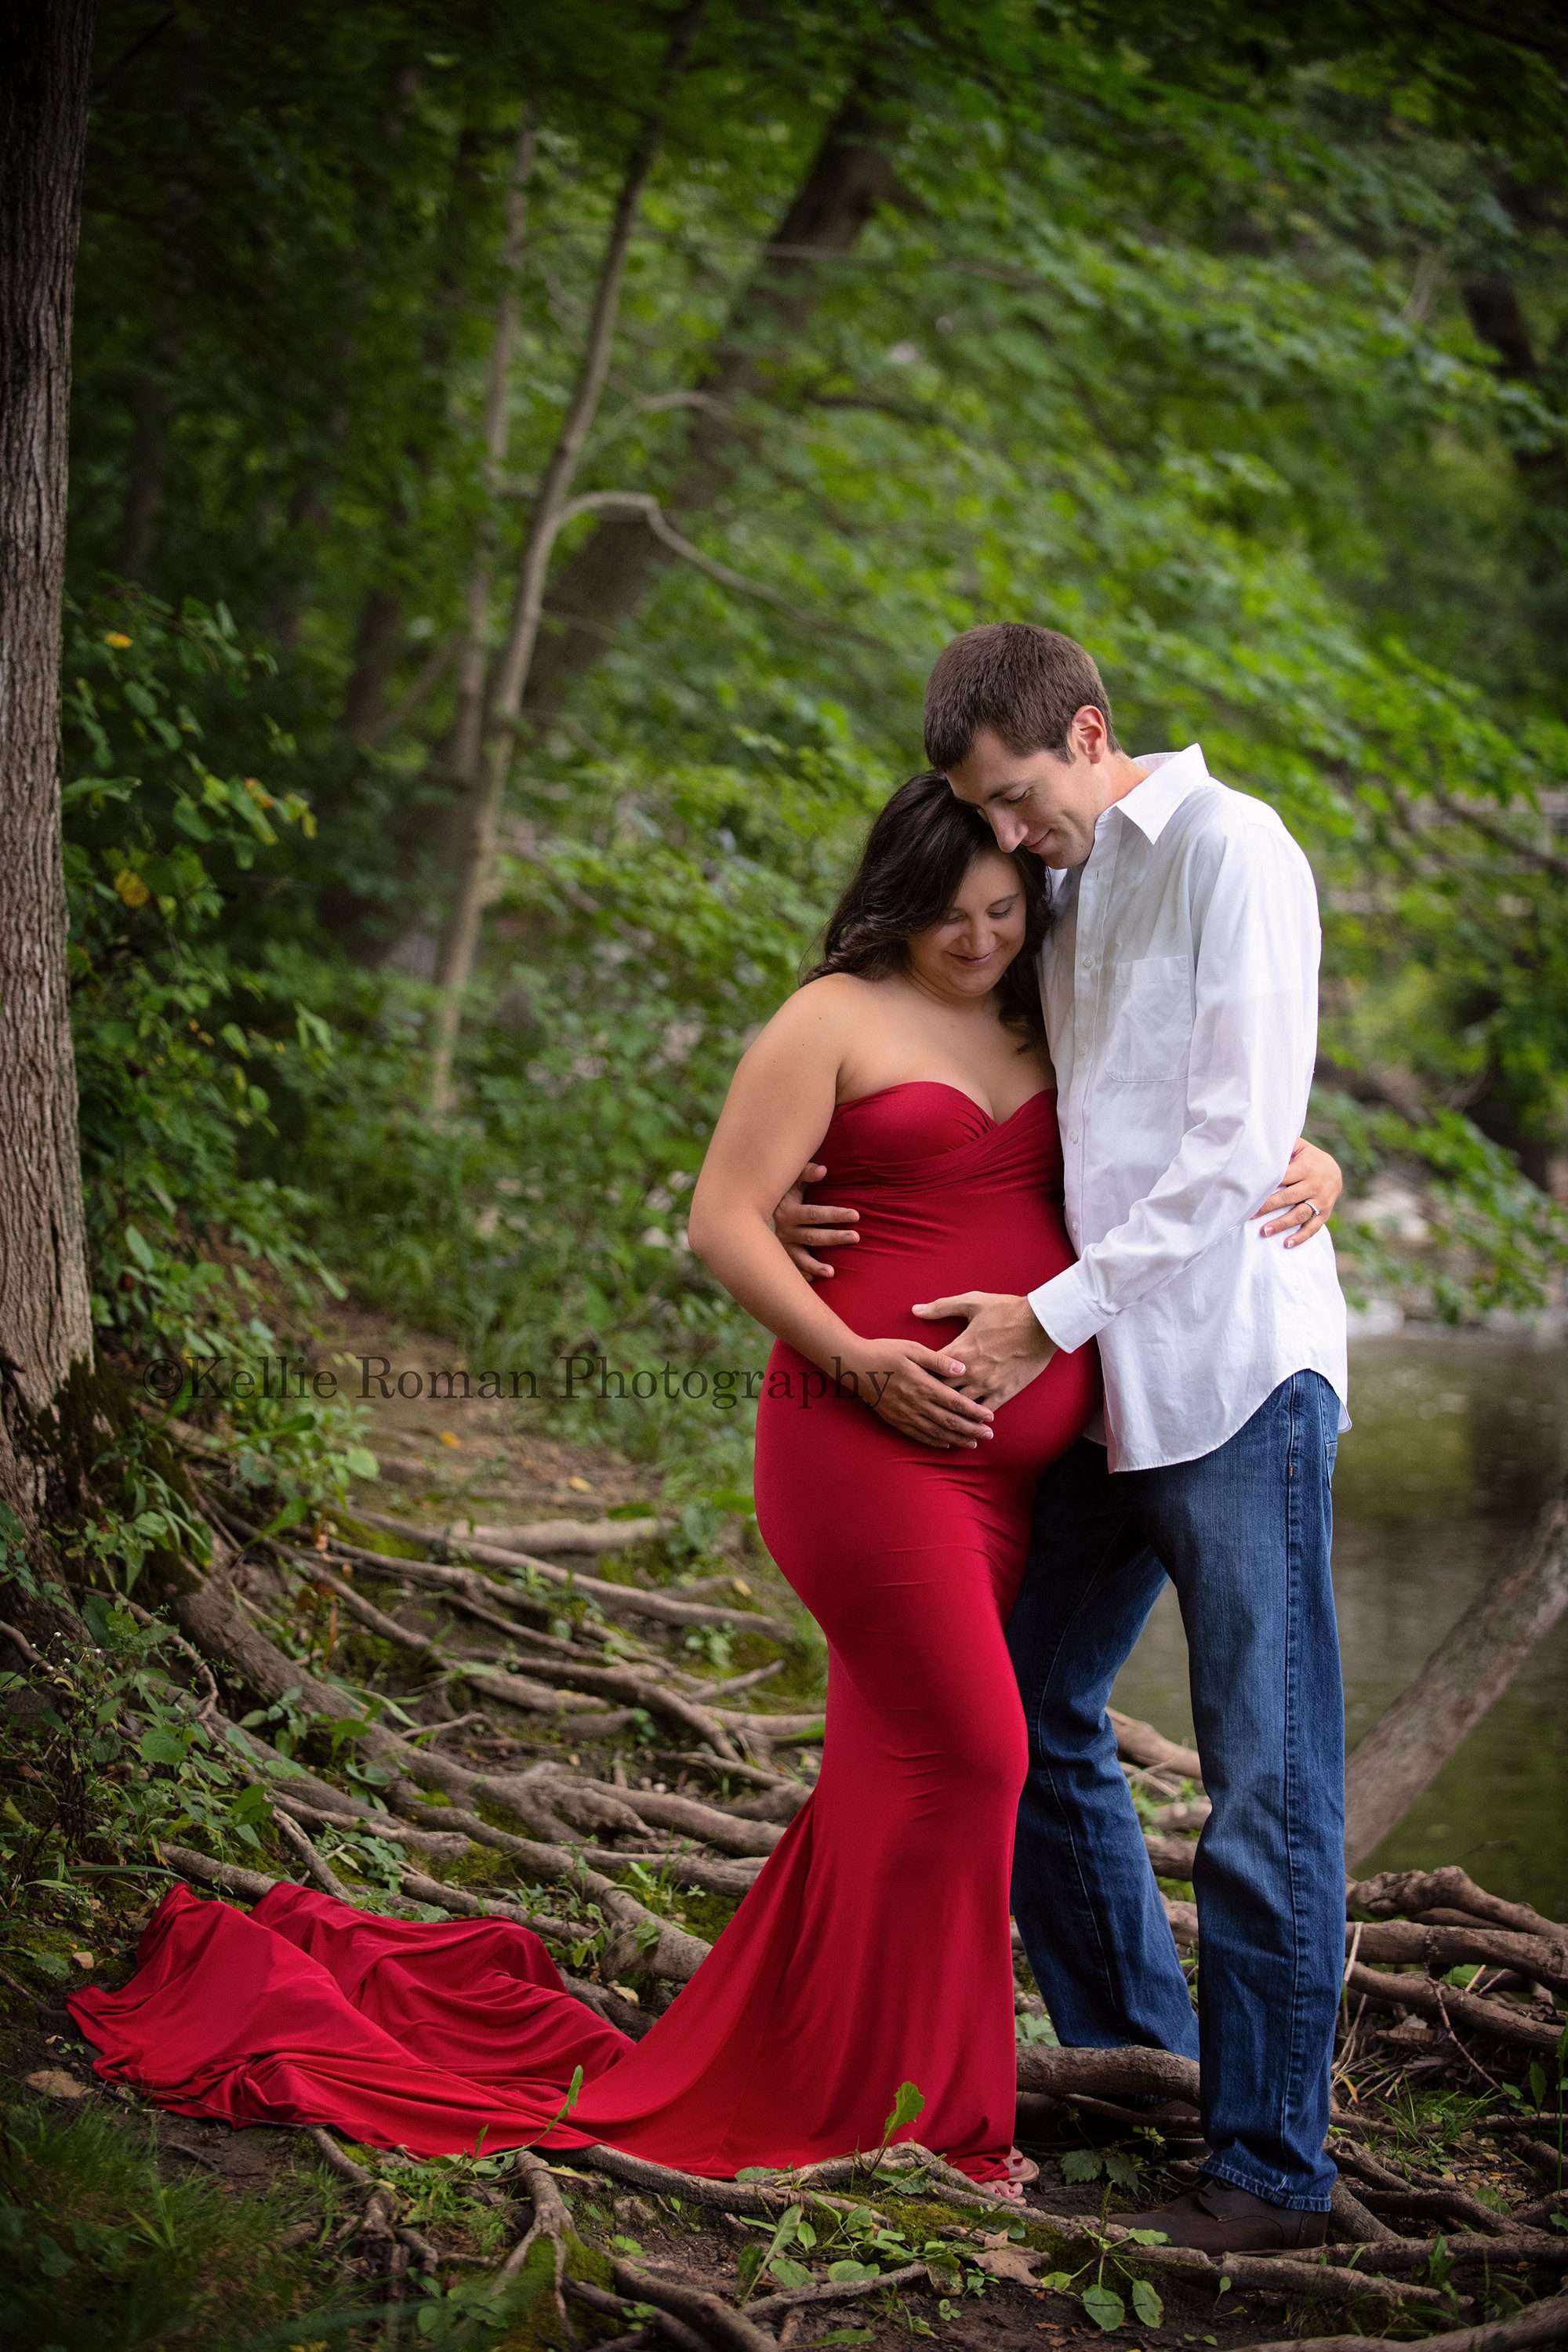 maternity gowns a couple expecting their first child in kenosha standing in a park near a river they are standing on top of wild tree roots they the women is in a tight fitted red maternity gown with a train draped over the roots the man is wearing jeans and a white shirt they have their hands on women belly and are looking down smiling